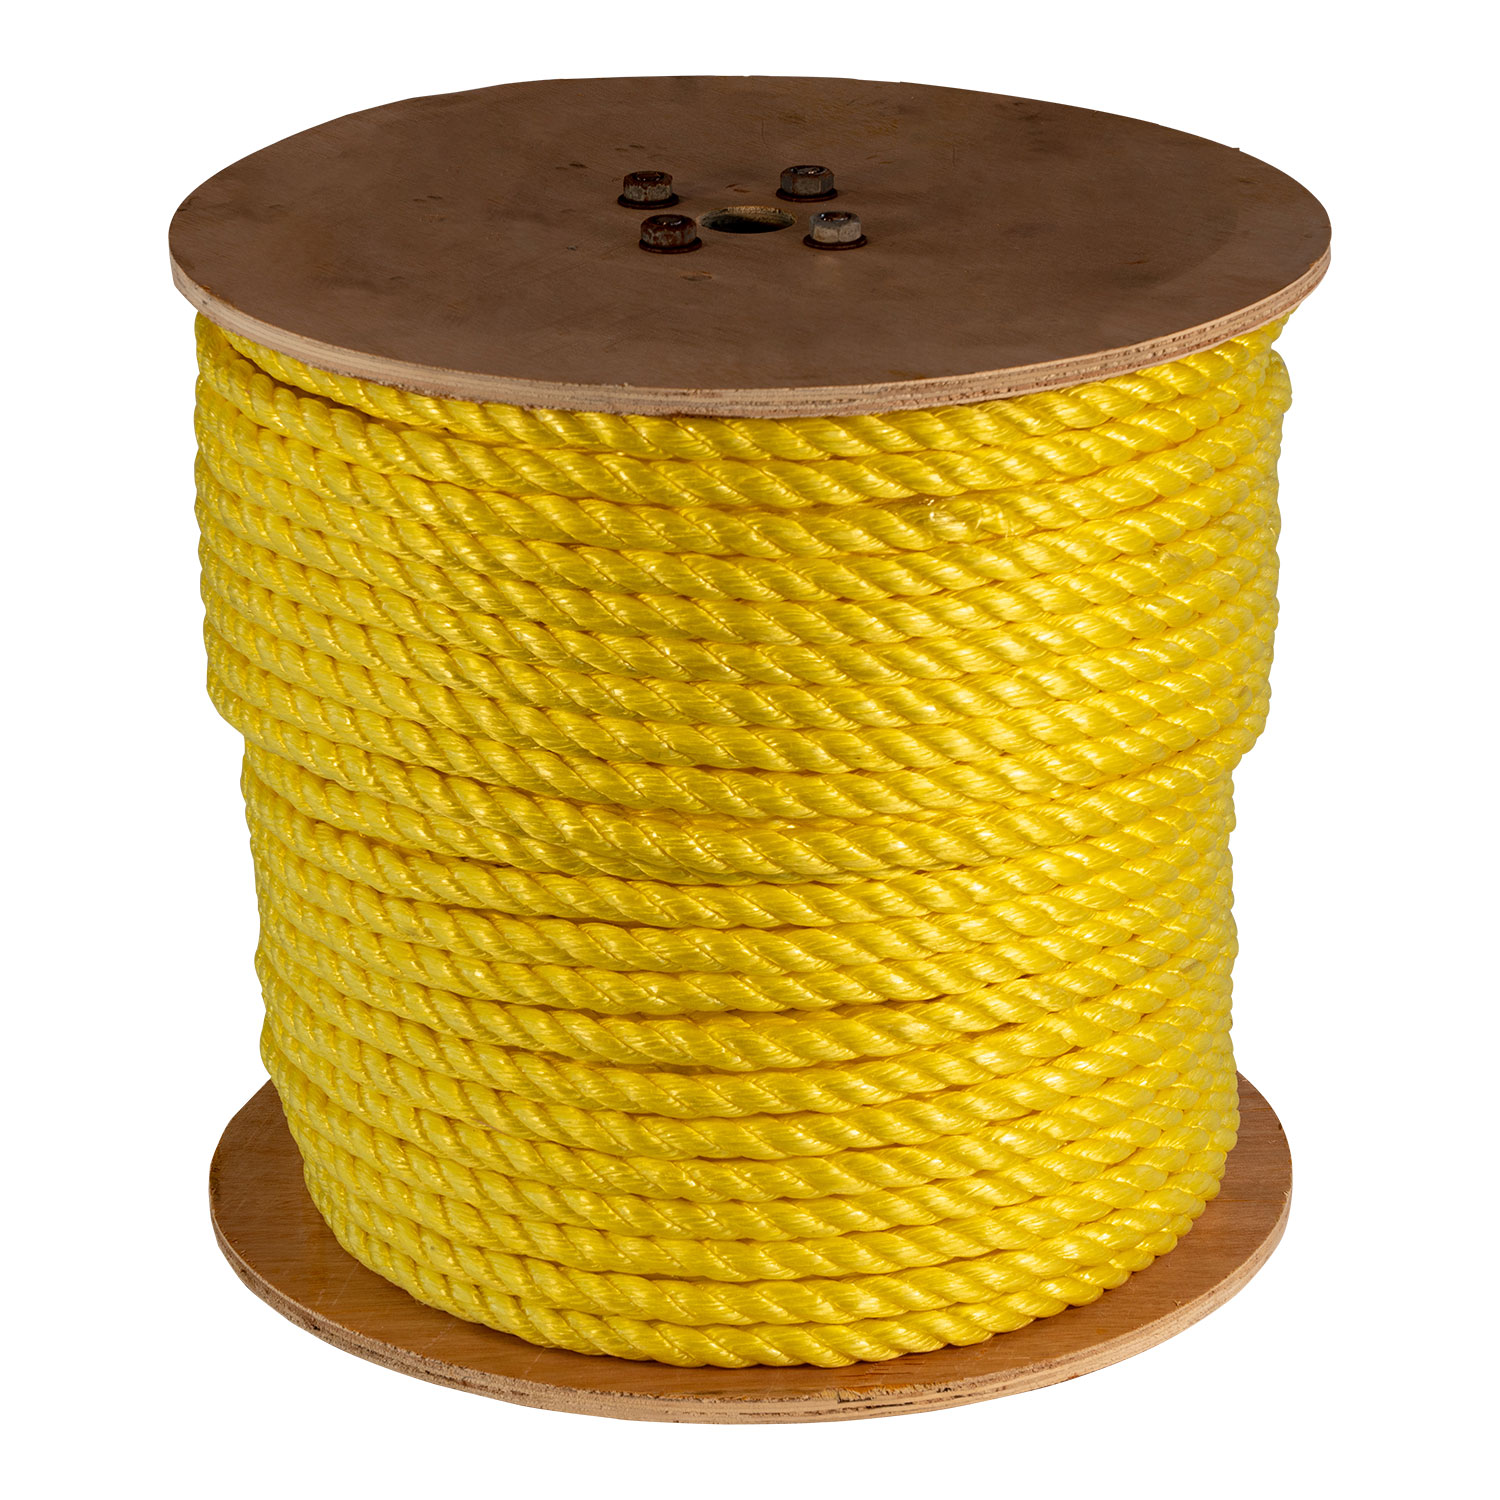 Chemical Twisted 3 Strand Line with Polyolefin Core Commercial Resistant to UV 3/8 Inch Arborist Marine Poly Dacron Rope Moisture and Weather Conditions DIY Projects Abrasion 50 Feet 